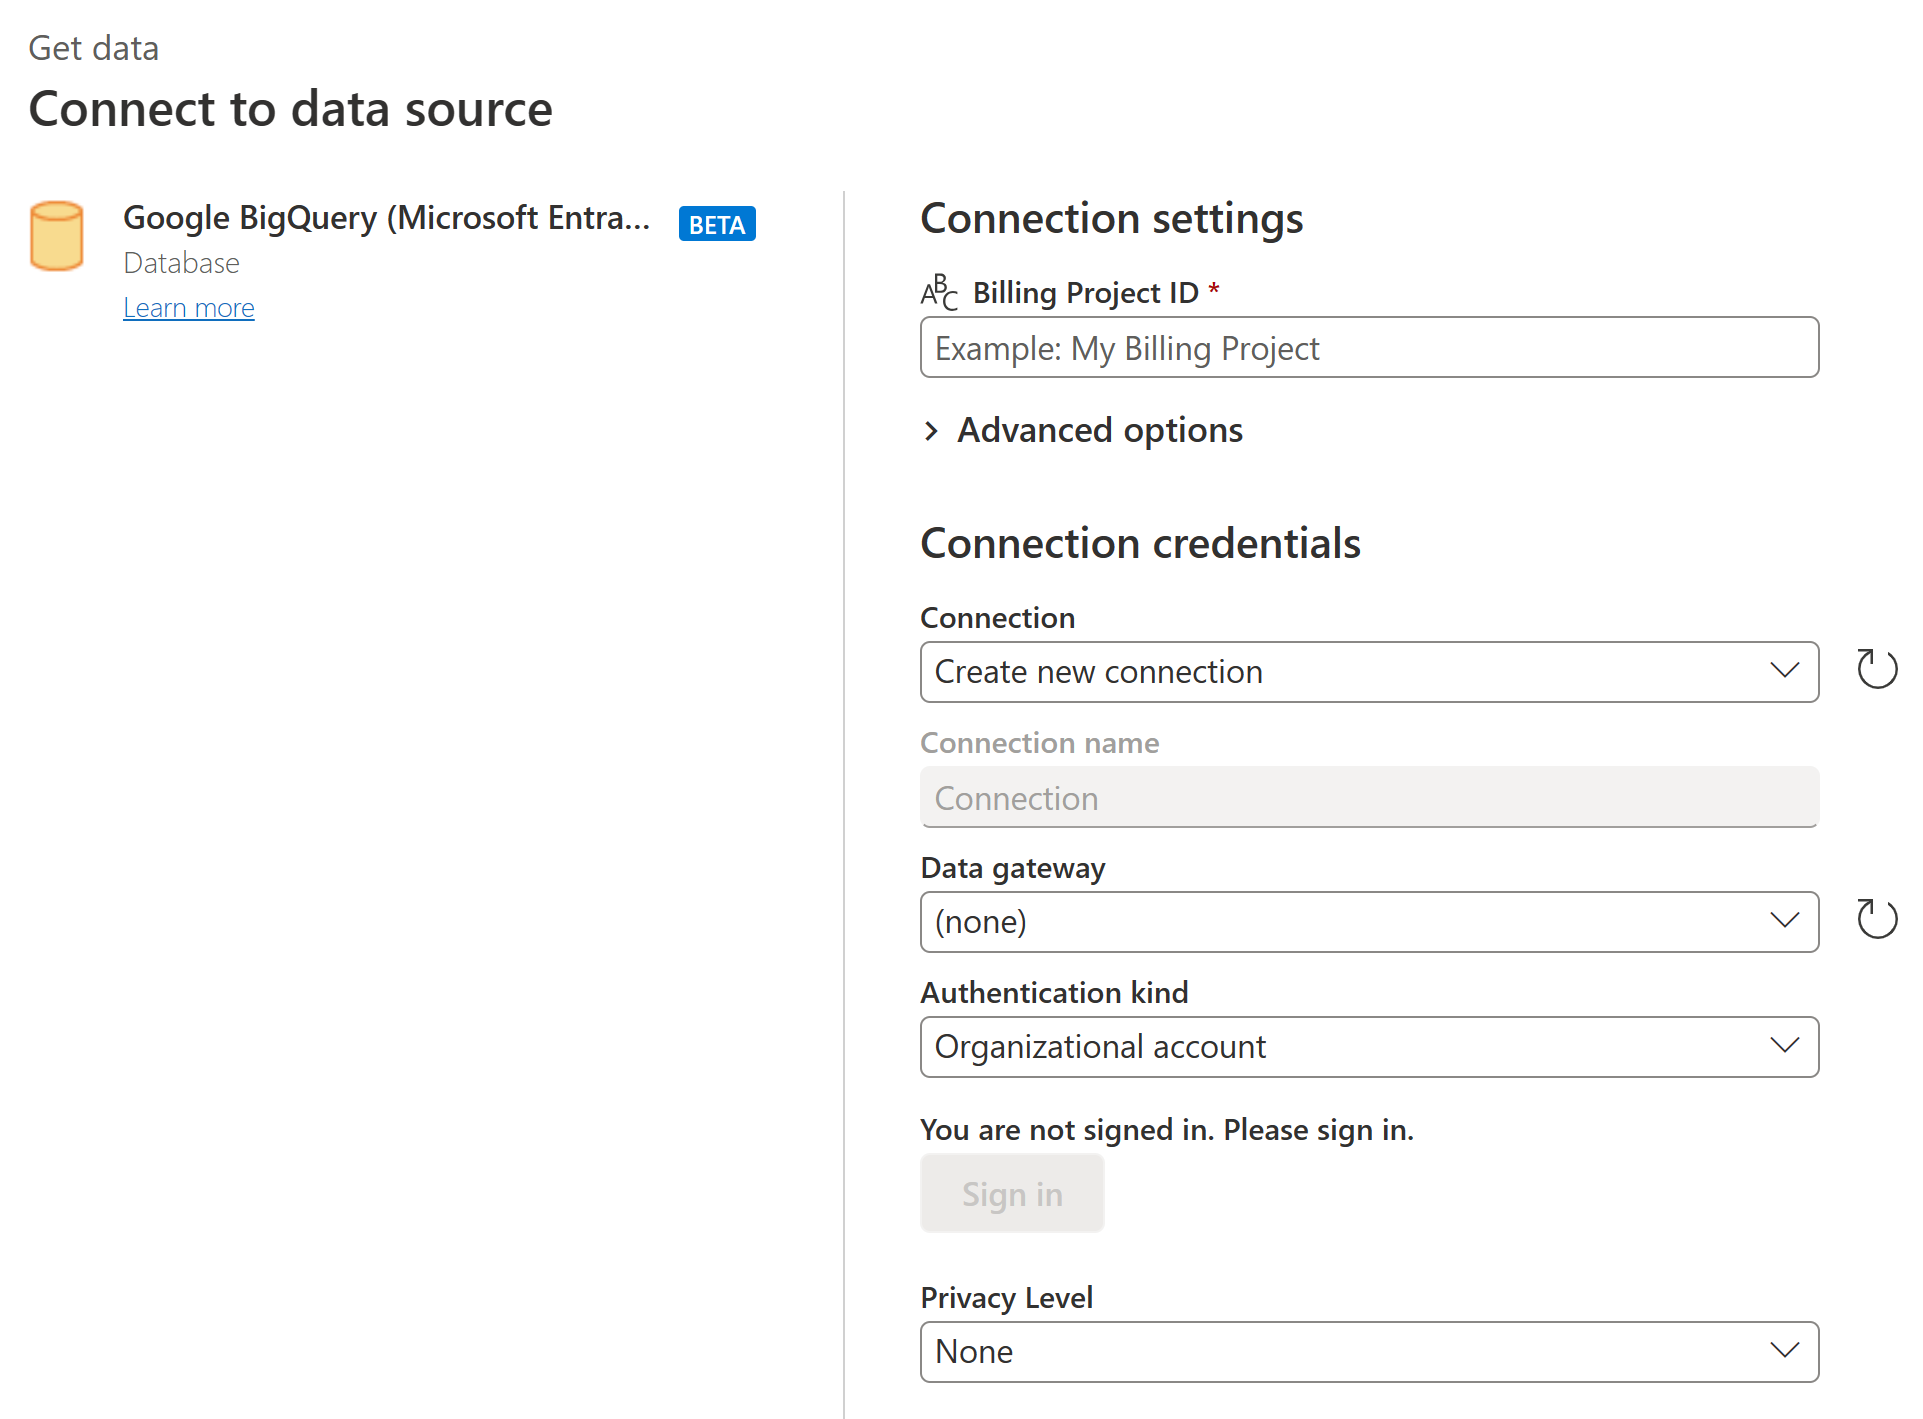 Screenshot of the Connect to data source dialog where you enter your Google BigQuery (Microsoft Entra ID) connection settings and credentials.